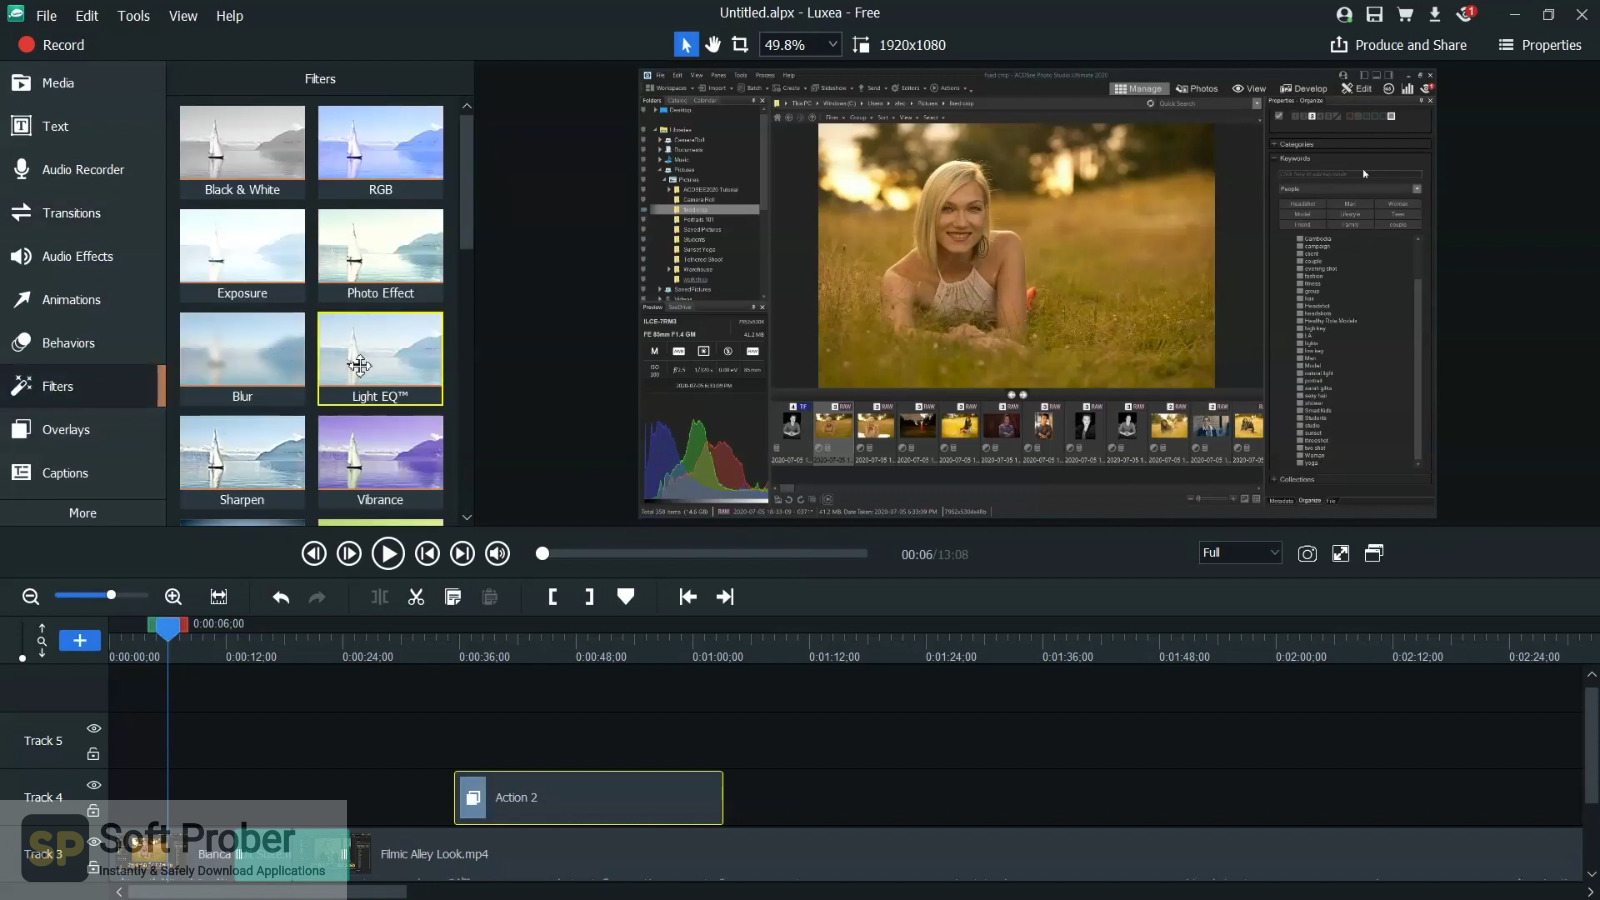 ACDSee Luxea Video Editor 7.1.3.2421 for apple download